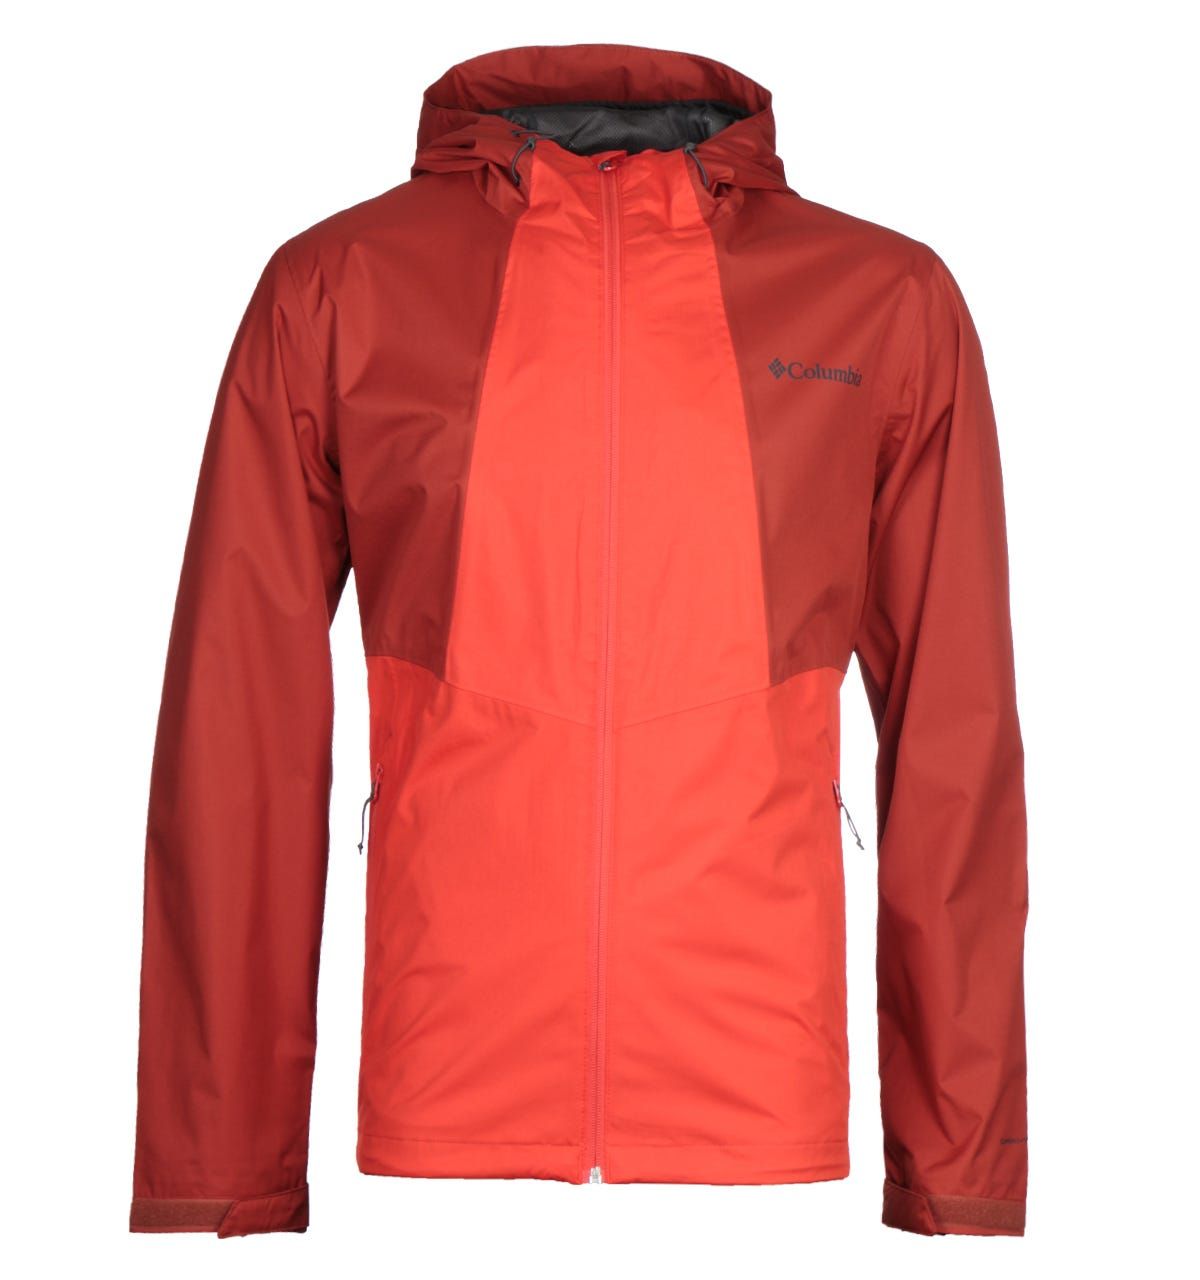 <p>A seasonal essential, crafted by Columbia. The Columbia Inner Limits Red Jacket is a lightweight waterproof jacket that features an adjustable drawcord hood and a full zip fastening. The design is finished with the Columbia logo printed on the chest.</p><ul><li>Polyester composition</li><li>Full zip fastening</li><li>Drawcord detachable hood</li><li>Waterproof</li><li>Columbia logo printed on chest</li></ul><p>Style & Fit:</p><ul><li>Regular fit</li><li>Fits true to size</li></ul><p>Fabric Composition & Care:</p><ul><li>100% Polyester</li><li>Machine wash</li></ul>